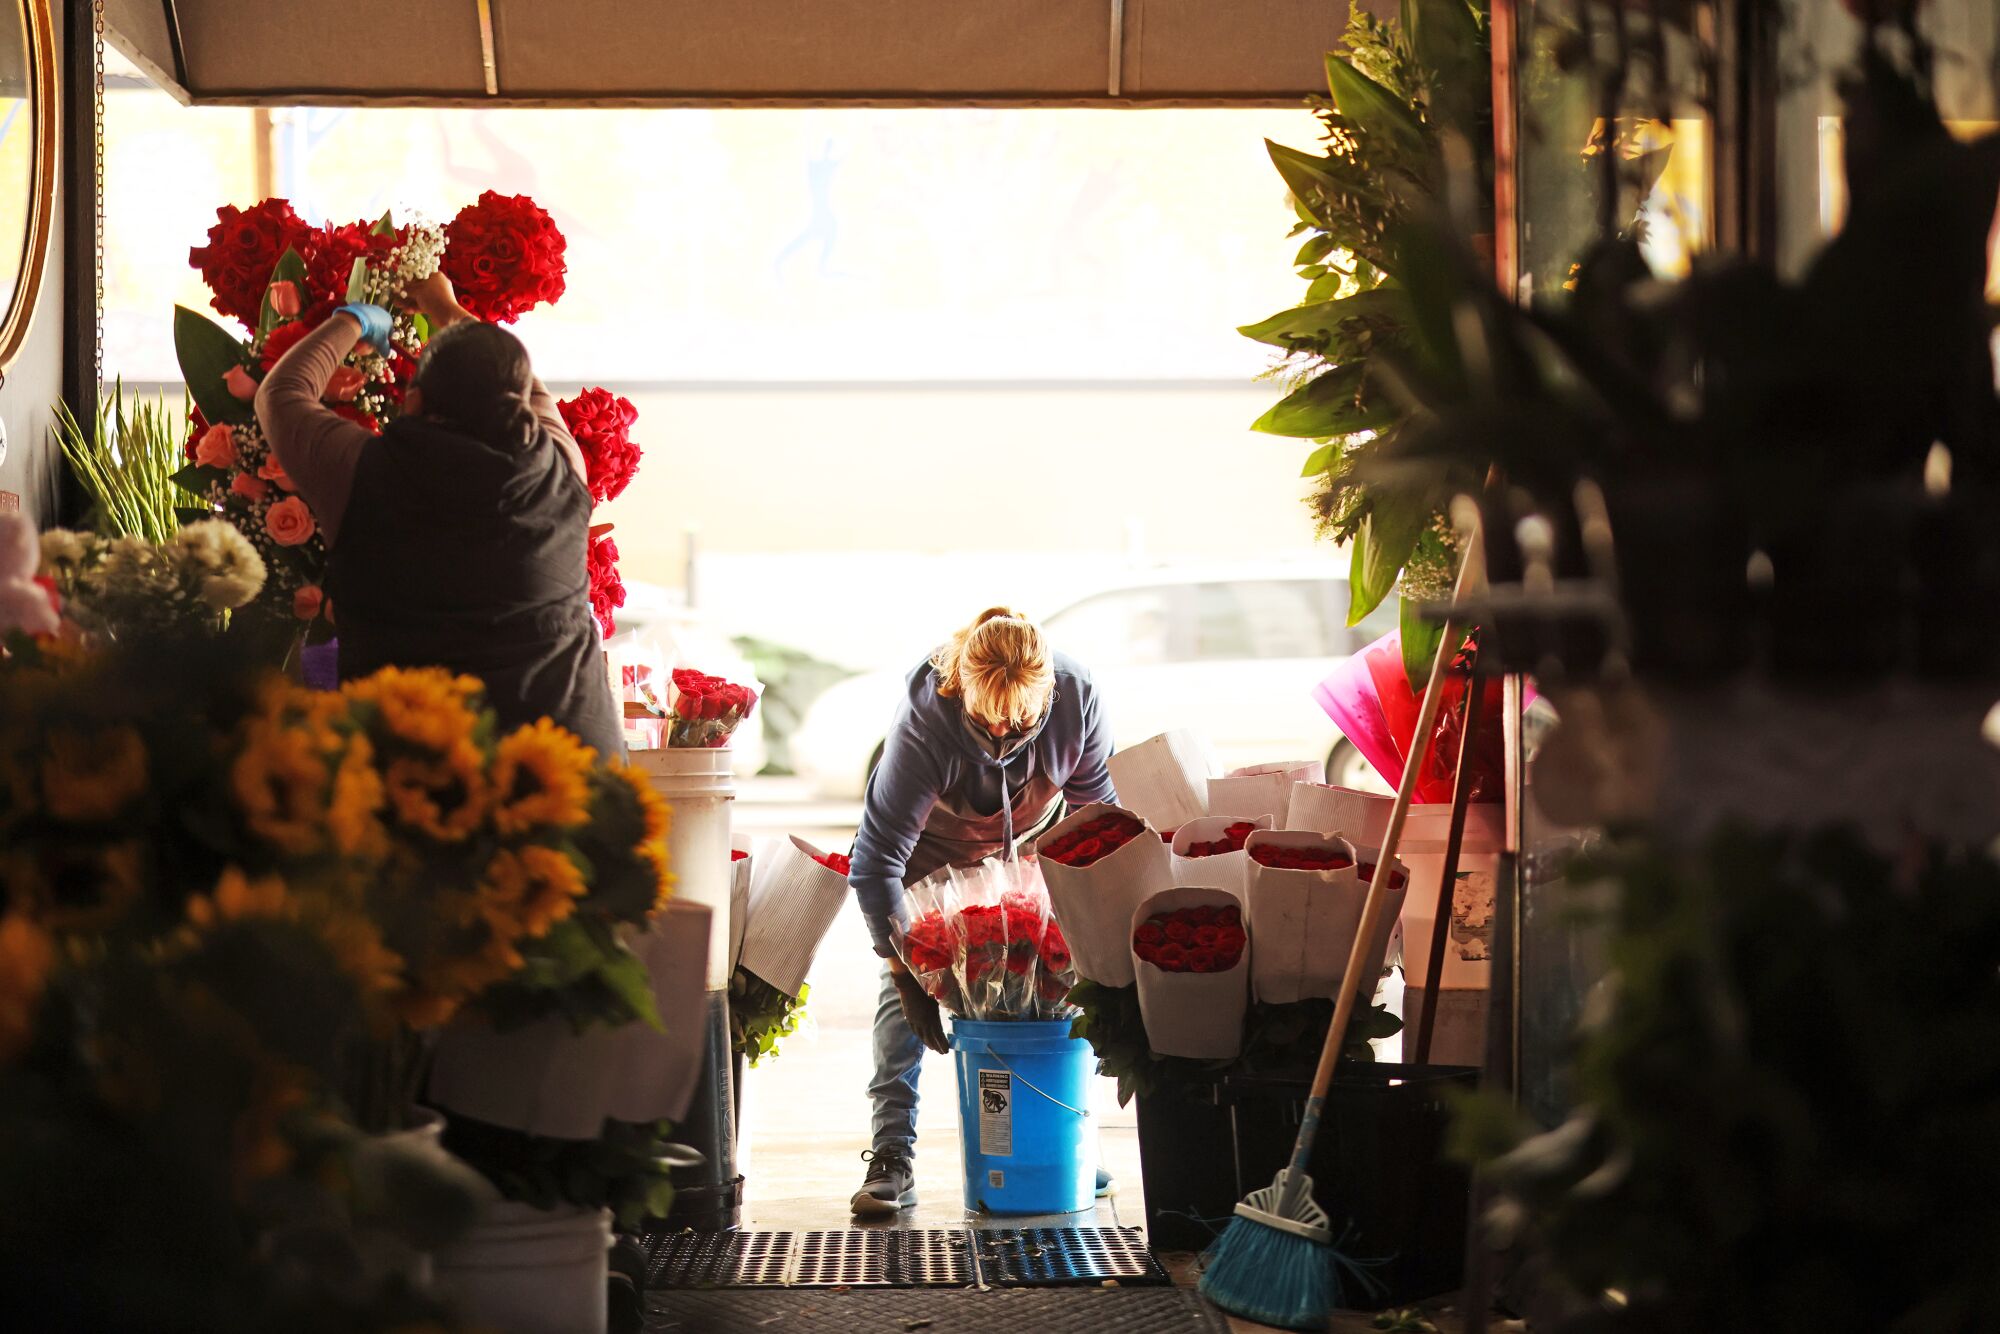 Adriana Gamez arranges the display at California Flowers.